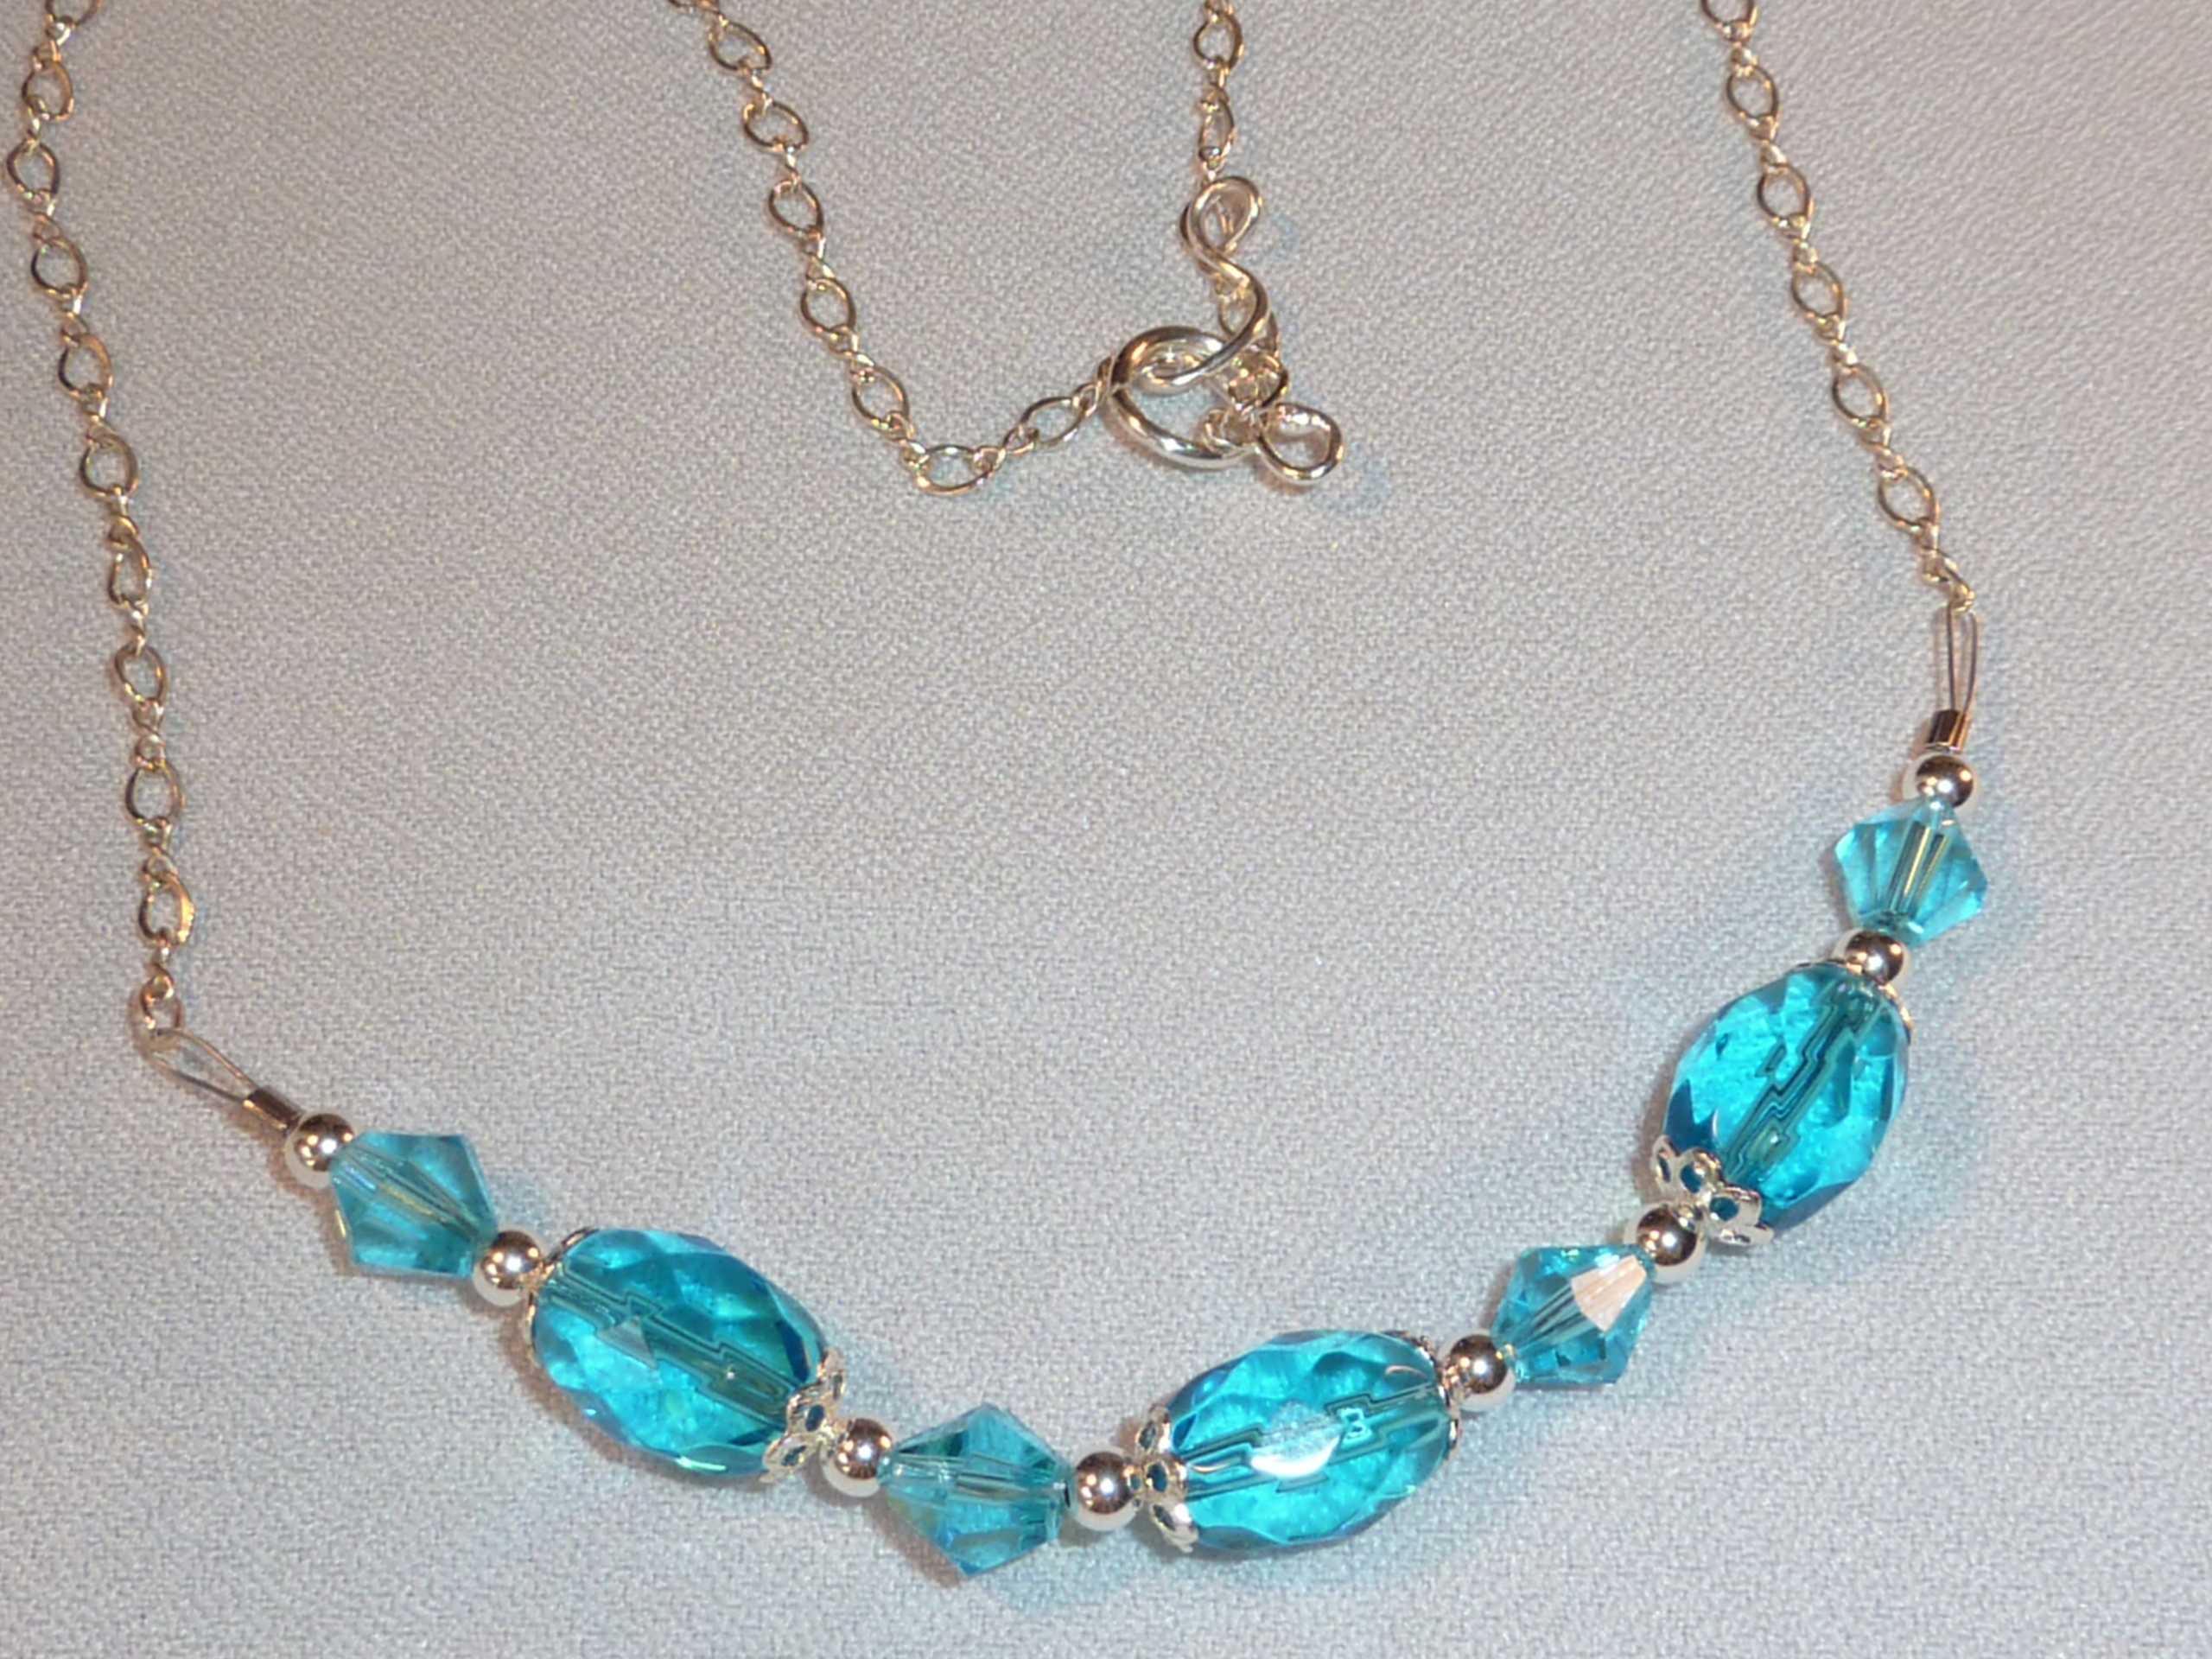 Turquoise Crystal & Sterling Silver Necklace - Jewelry Making Photo